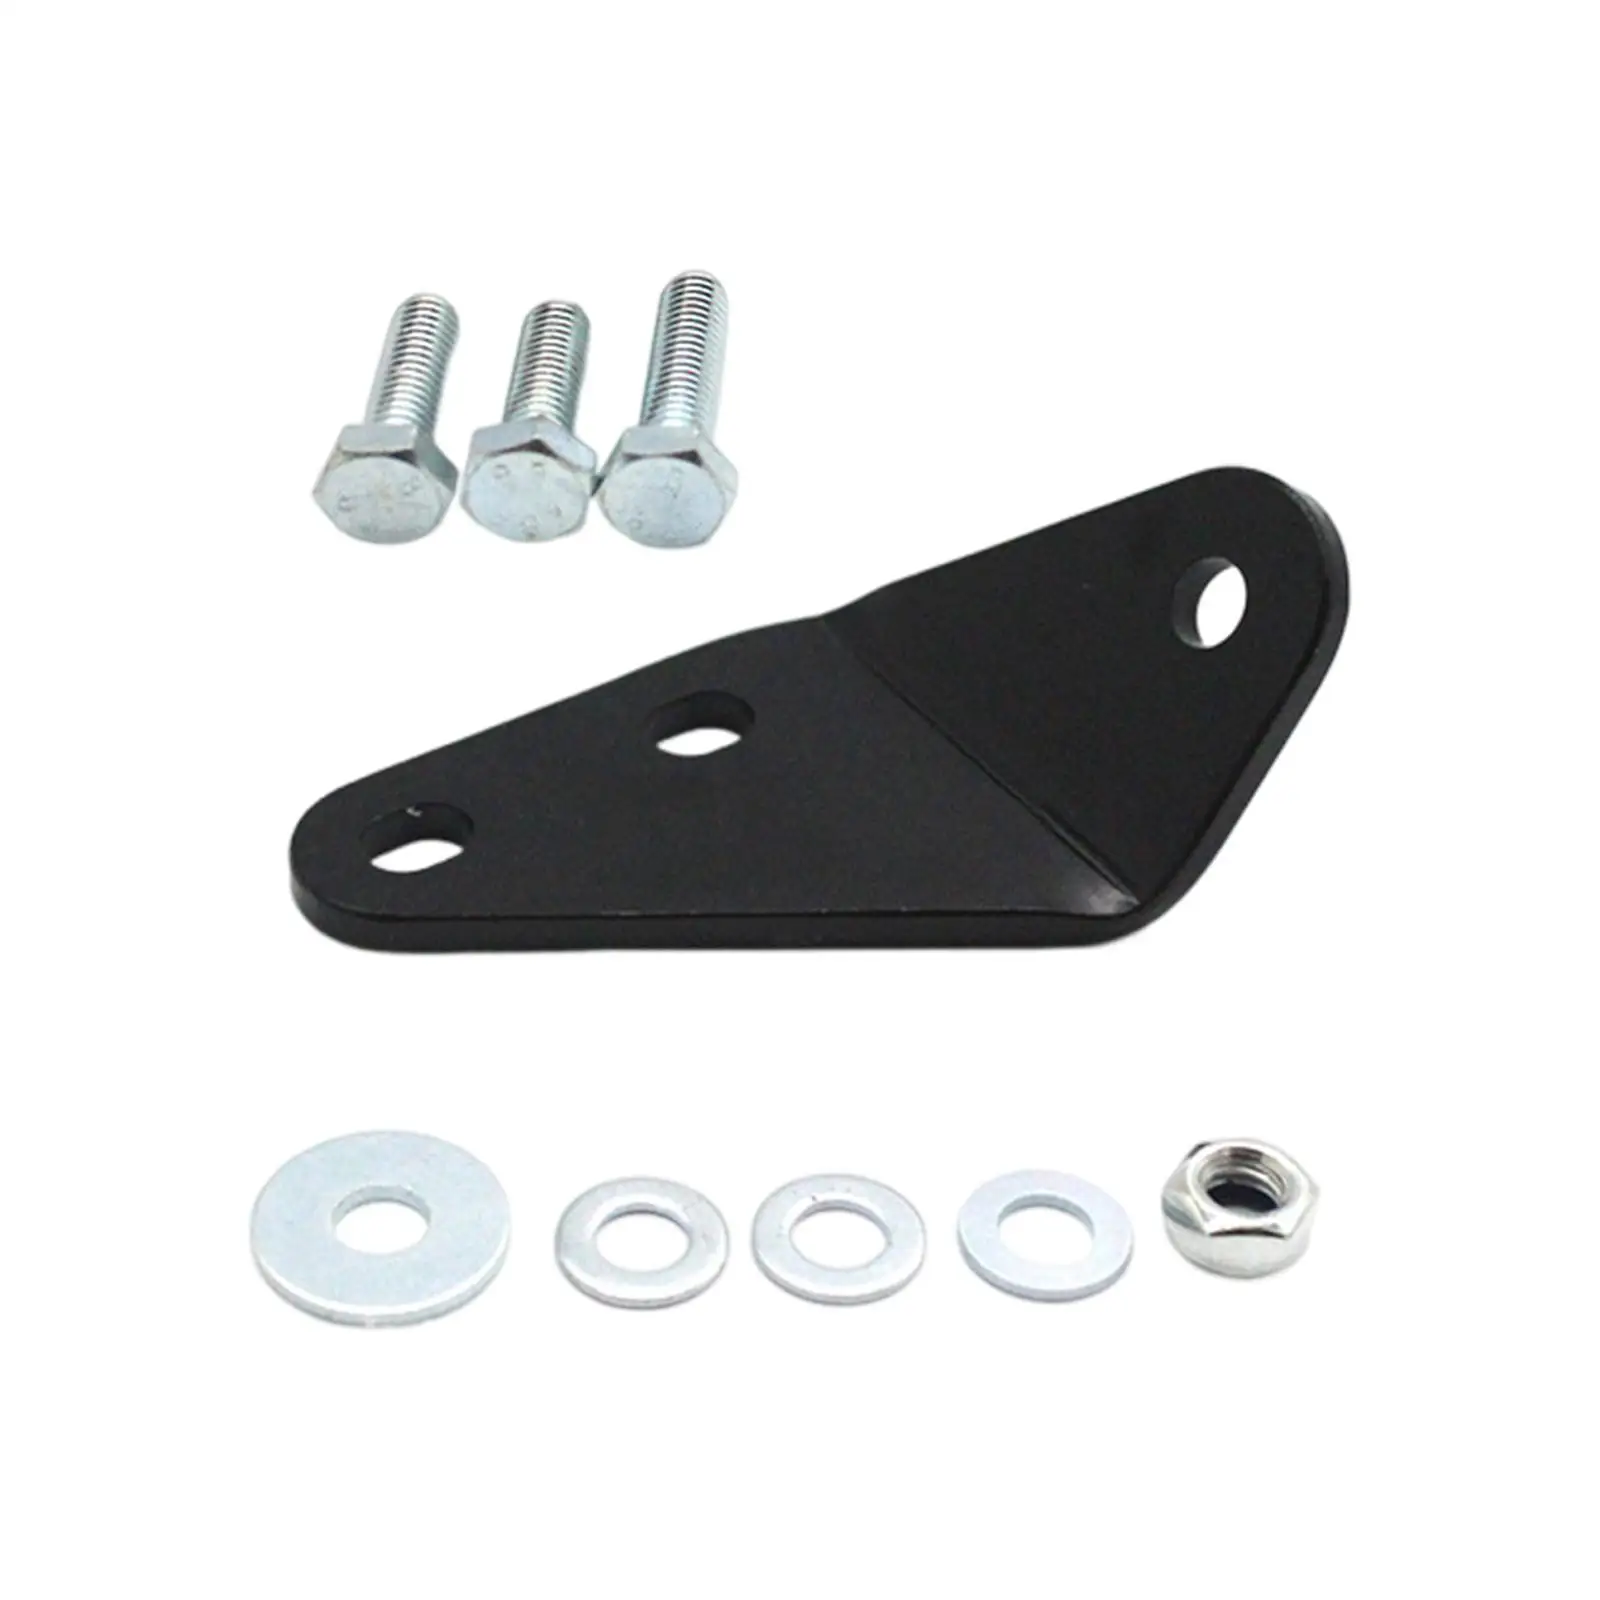 Clutch Pedal Repair Bracket Set High Quality Directly Replace for Volkswagen T4 Transporter Multivan Caravelle Accessories